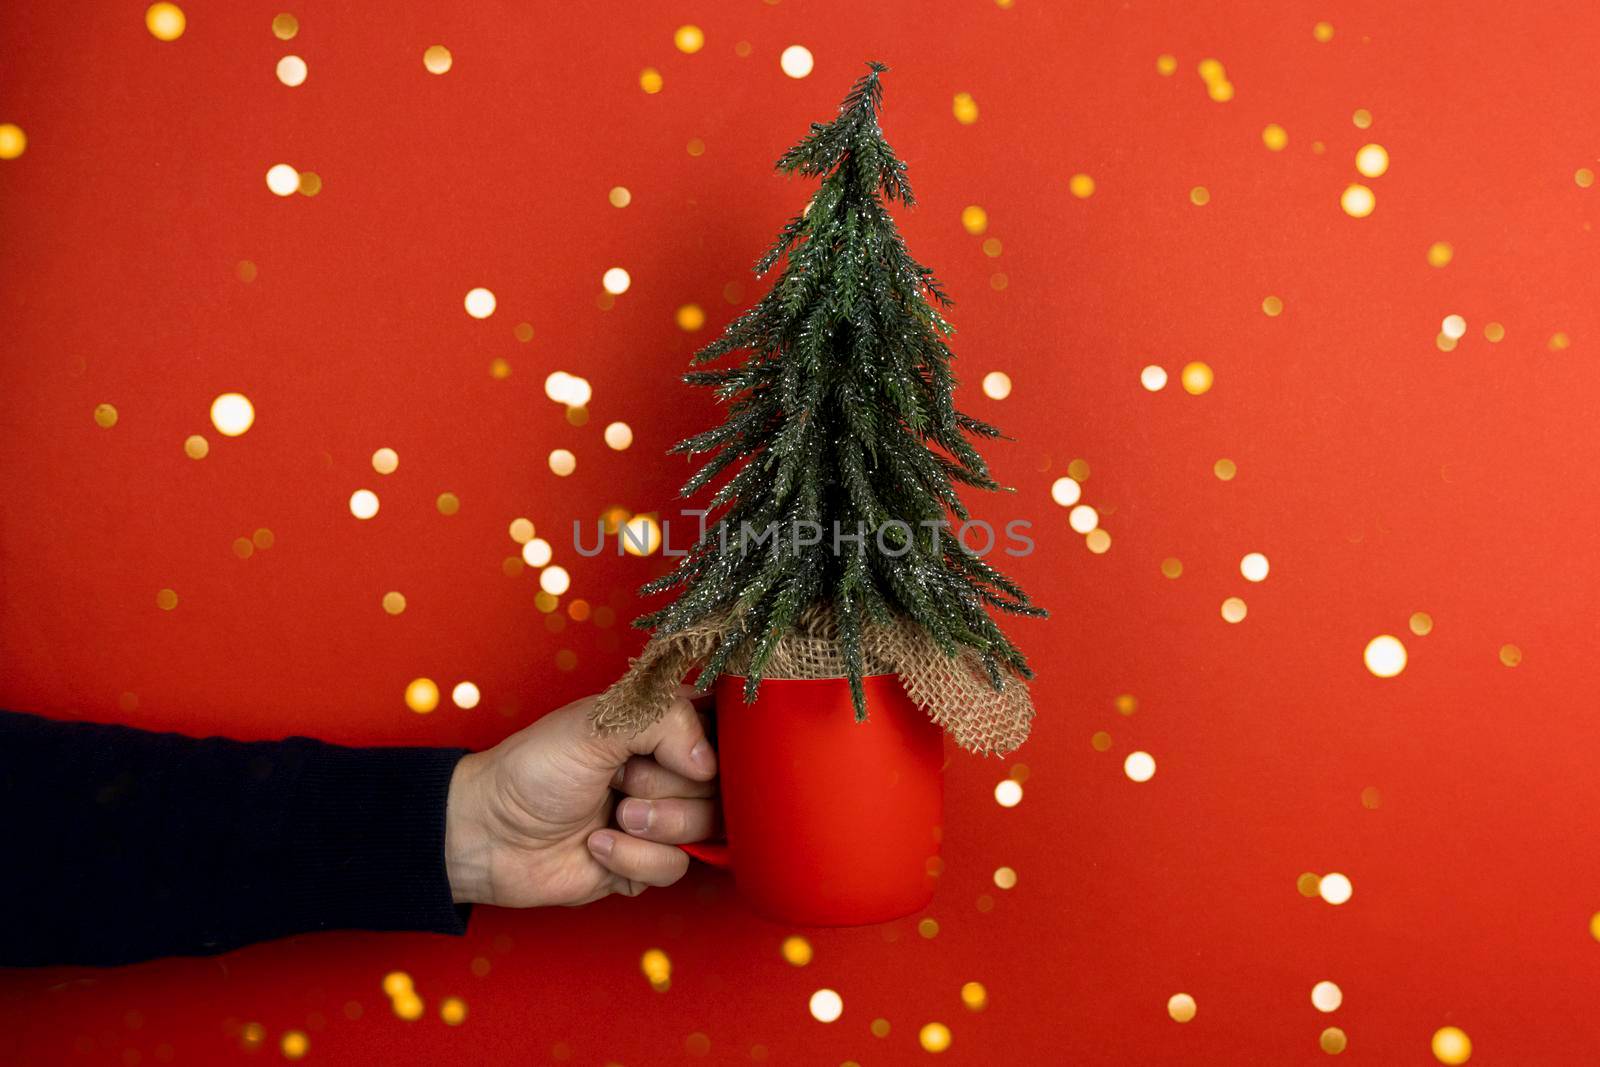 Caucasian man hand holding a red mug with pine tree by uveita